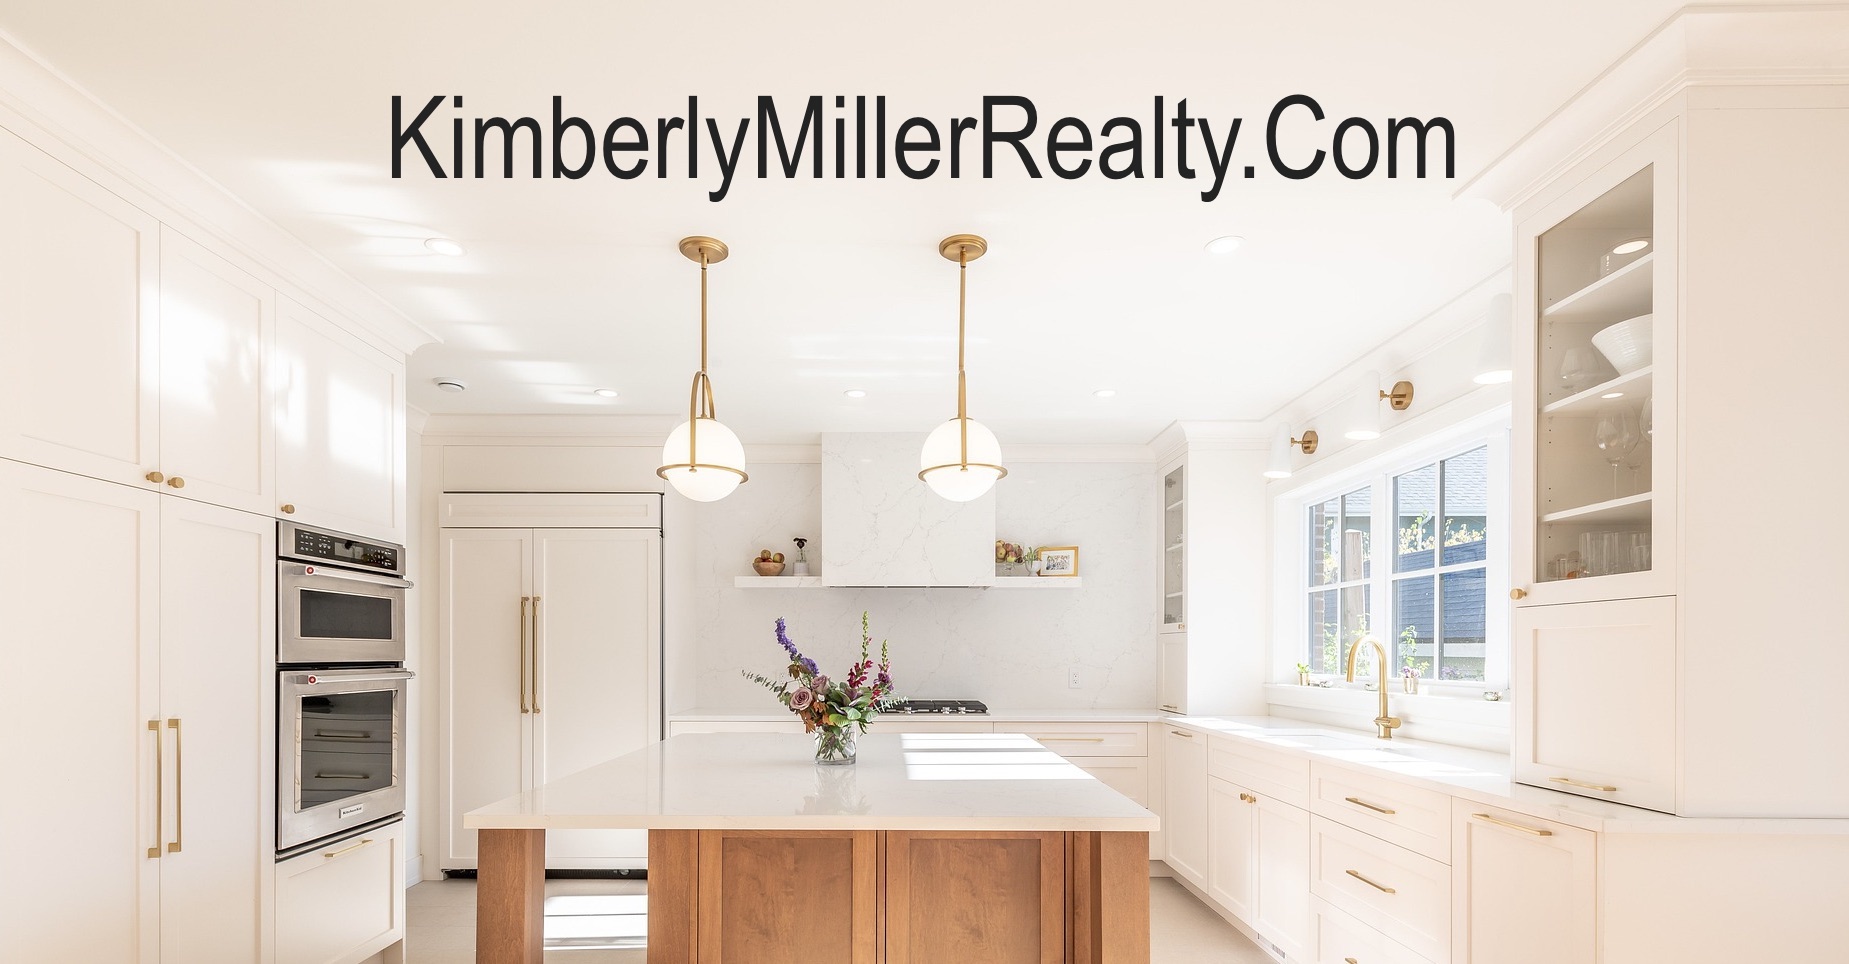 Kimberly Miller Realty